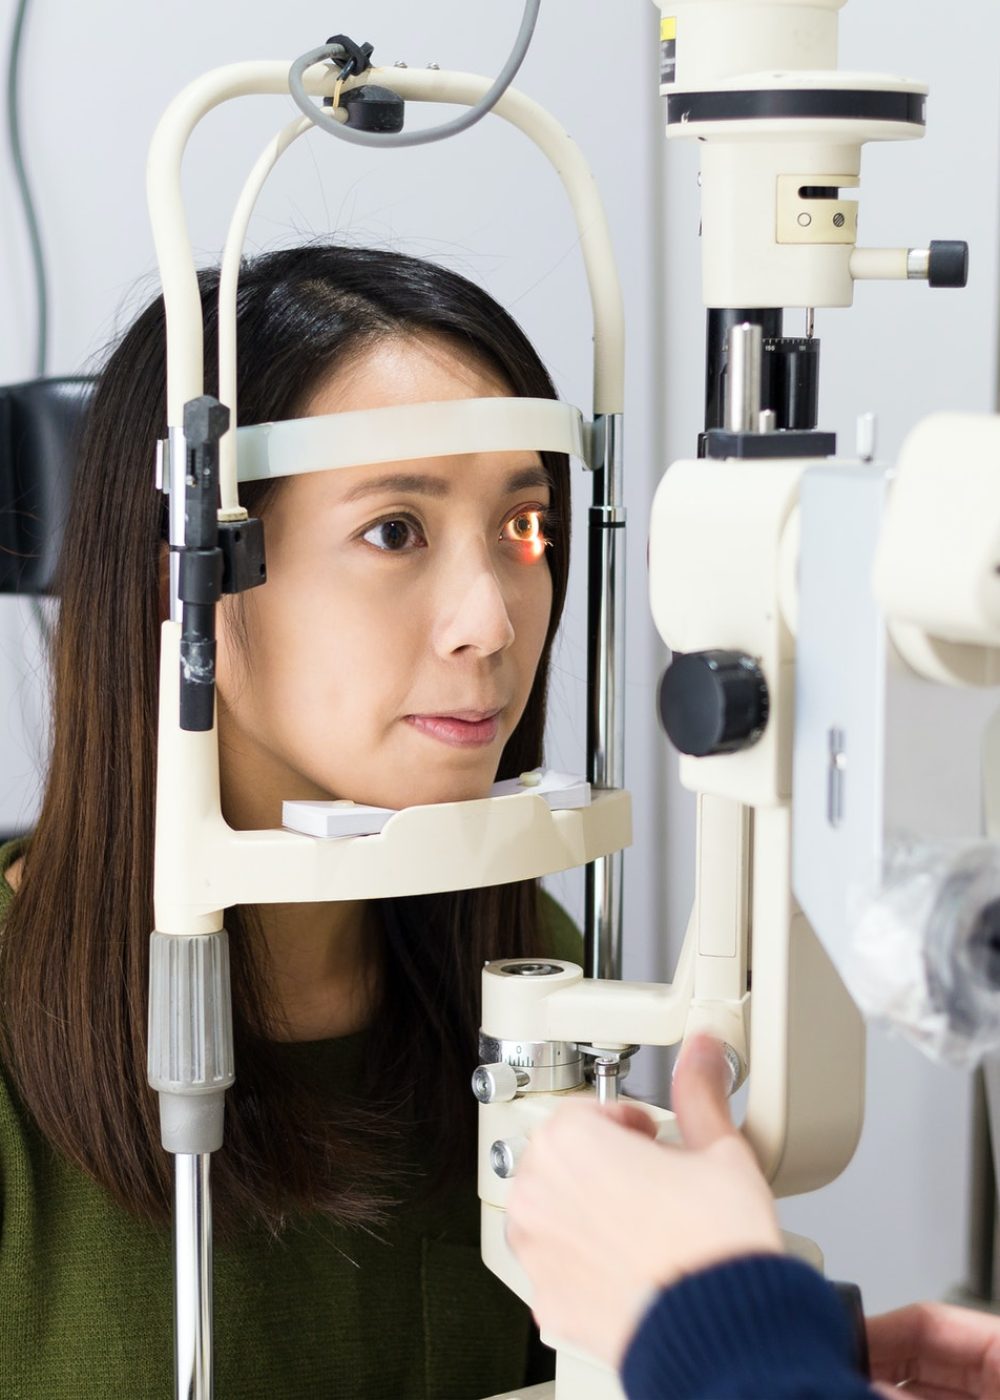 patient-during-an-eye-examination-at-the-eye-clinic.jpg